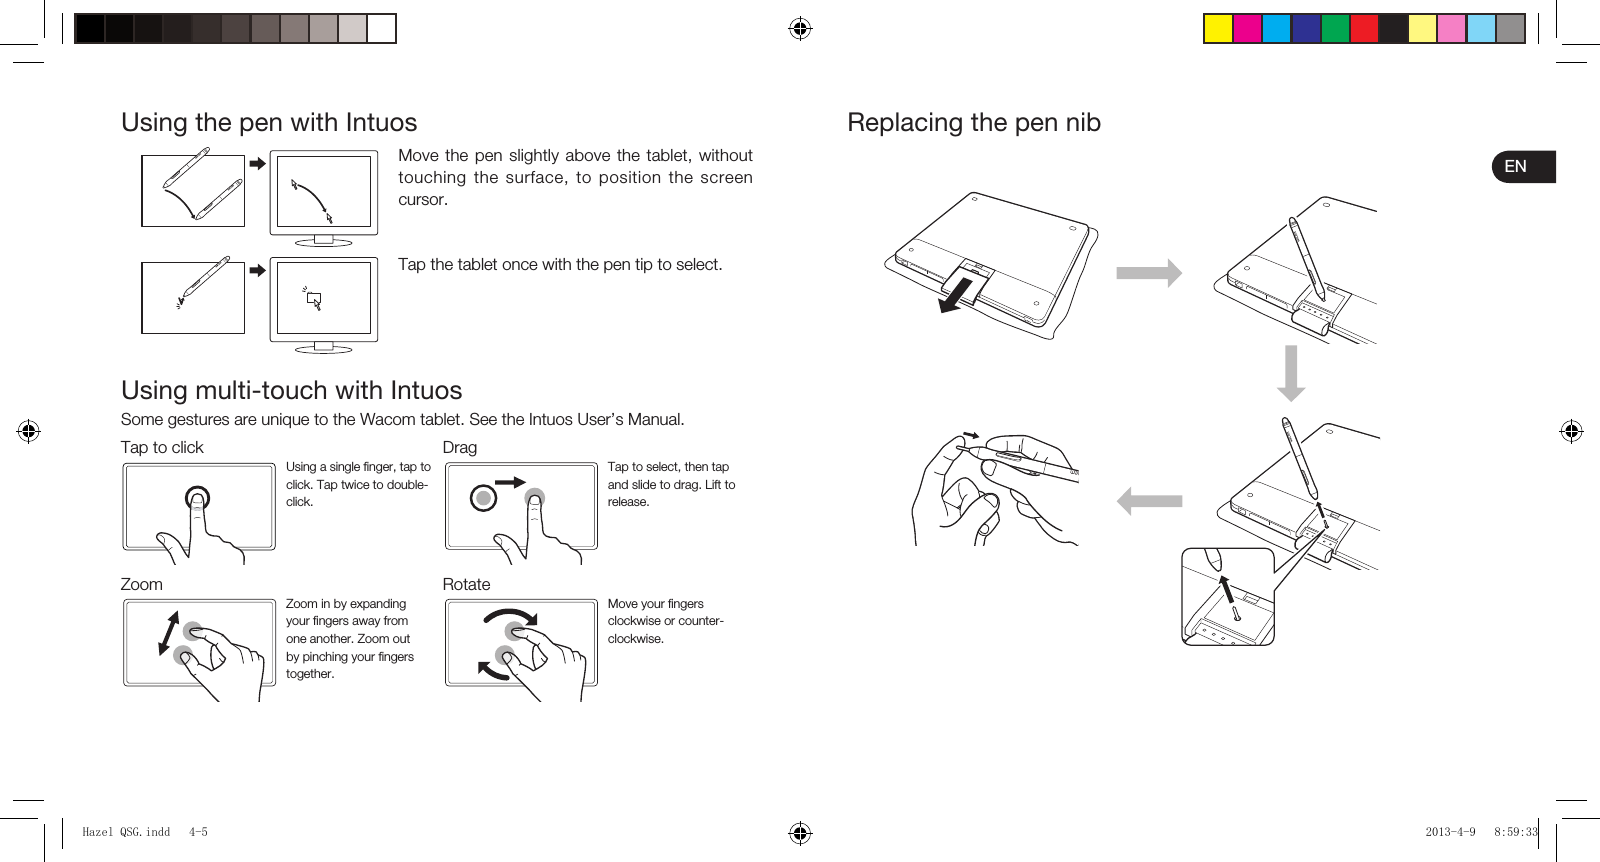 ENUsing the pen with IntuosMove the pen slightly above the tablet, without touching the surface, to position the screen cursor.Tap the tablet once with the pen tip to select.Using multi-touch with IntuosSome gestures are unique to the Wacom tablet. See the Intuos User’s Manual.Tap to click DragUsing a single ﬁ nger, tap to click. Tap twice to double-click.Tap to select, then tap and slide to drag. Lift to release.Zoom RotateZoom in by expanding your ﬁ ngers away from one another. Zoom out by pinching your ﬁ ngers together.Move your ﬁ ngers clockwise or counter-clockwise.Replacing the pen nibHazel QSG.indd   4-5Hazel QSG.indd   4-5 2013-4-9   8:59:332013-4-9   8:59:33